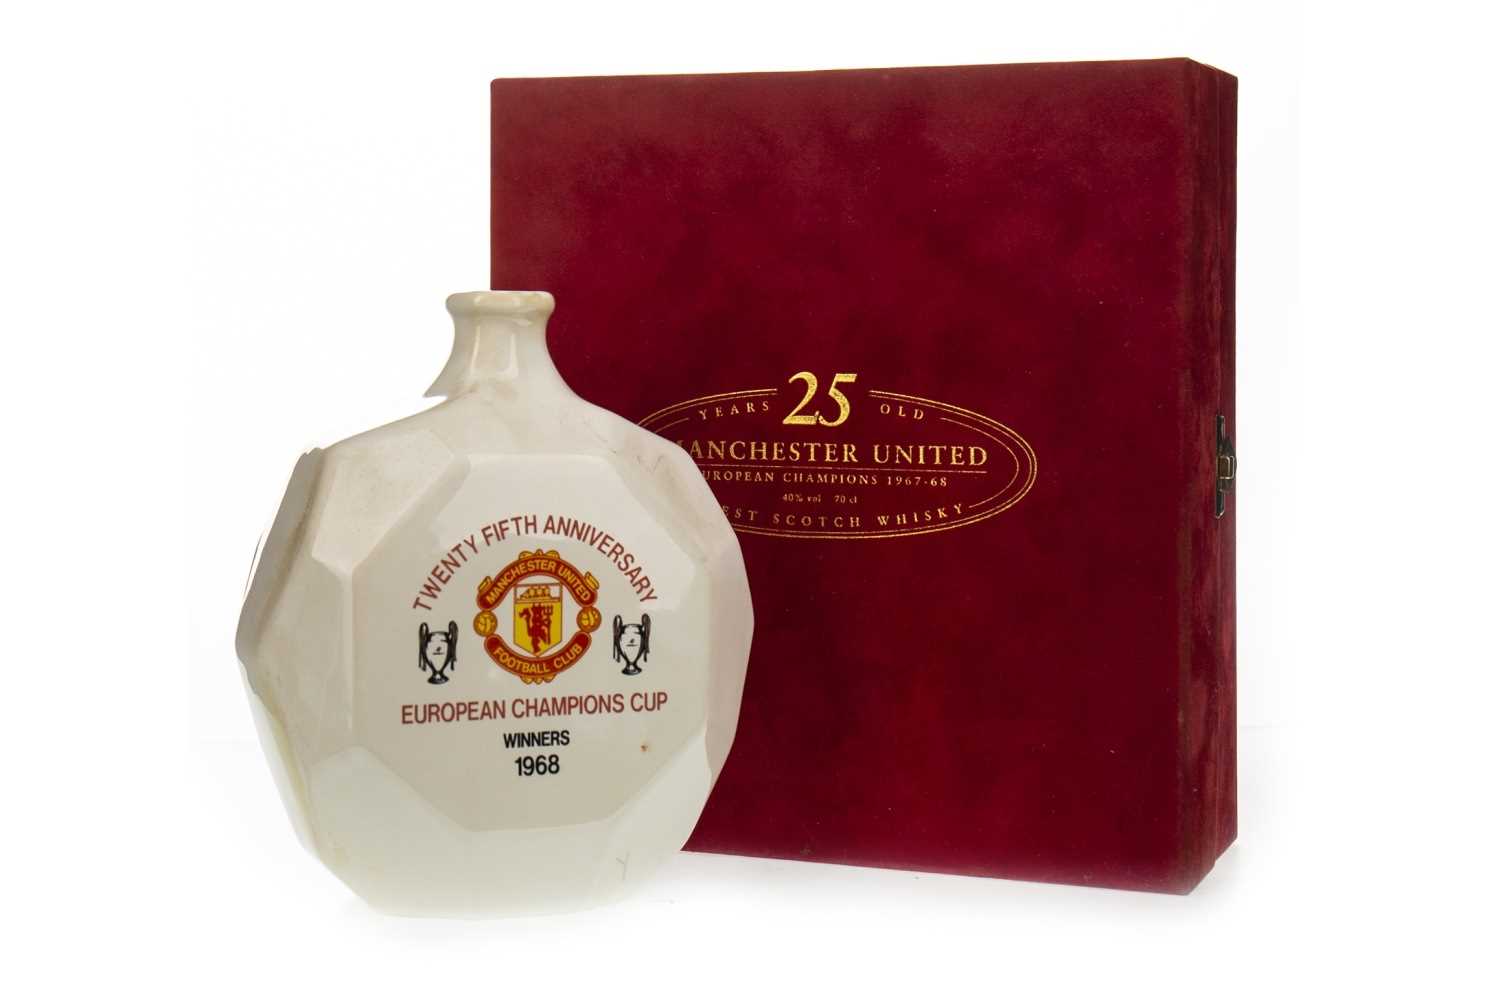 Lot 1068 - MANCHESTER UNITED EUROPEAN CHAMPIONS 1967/68 AGED 25 YEARS